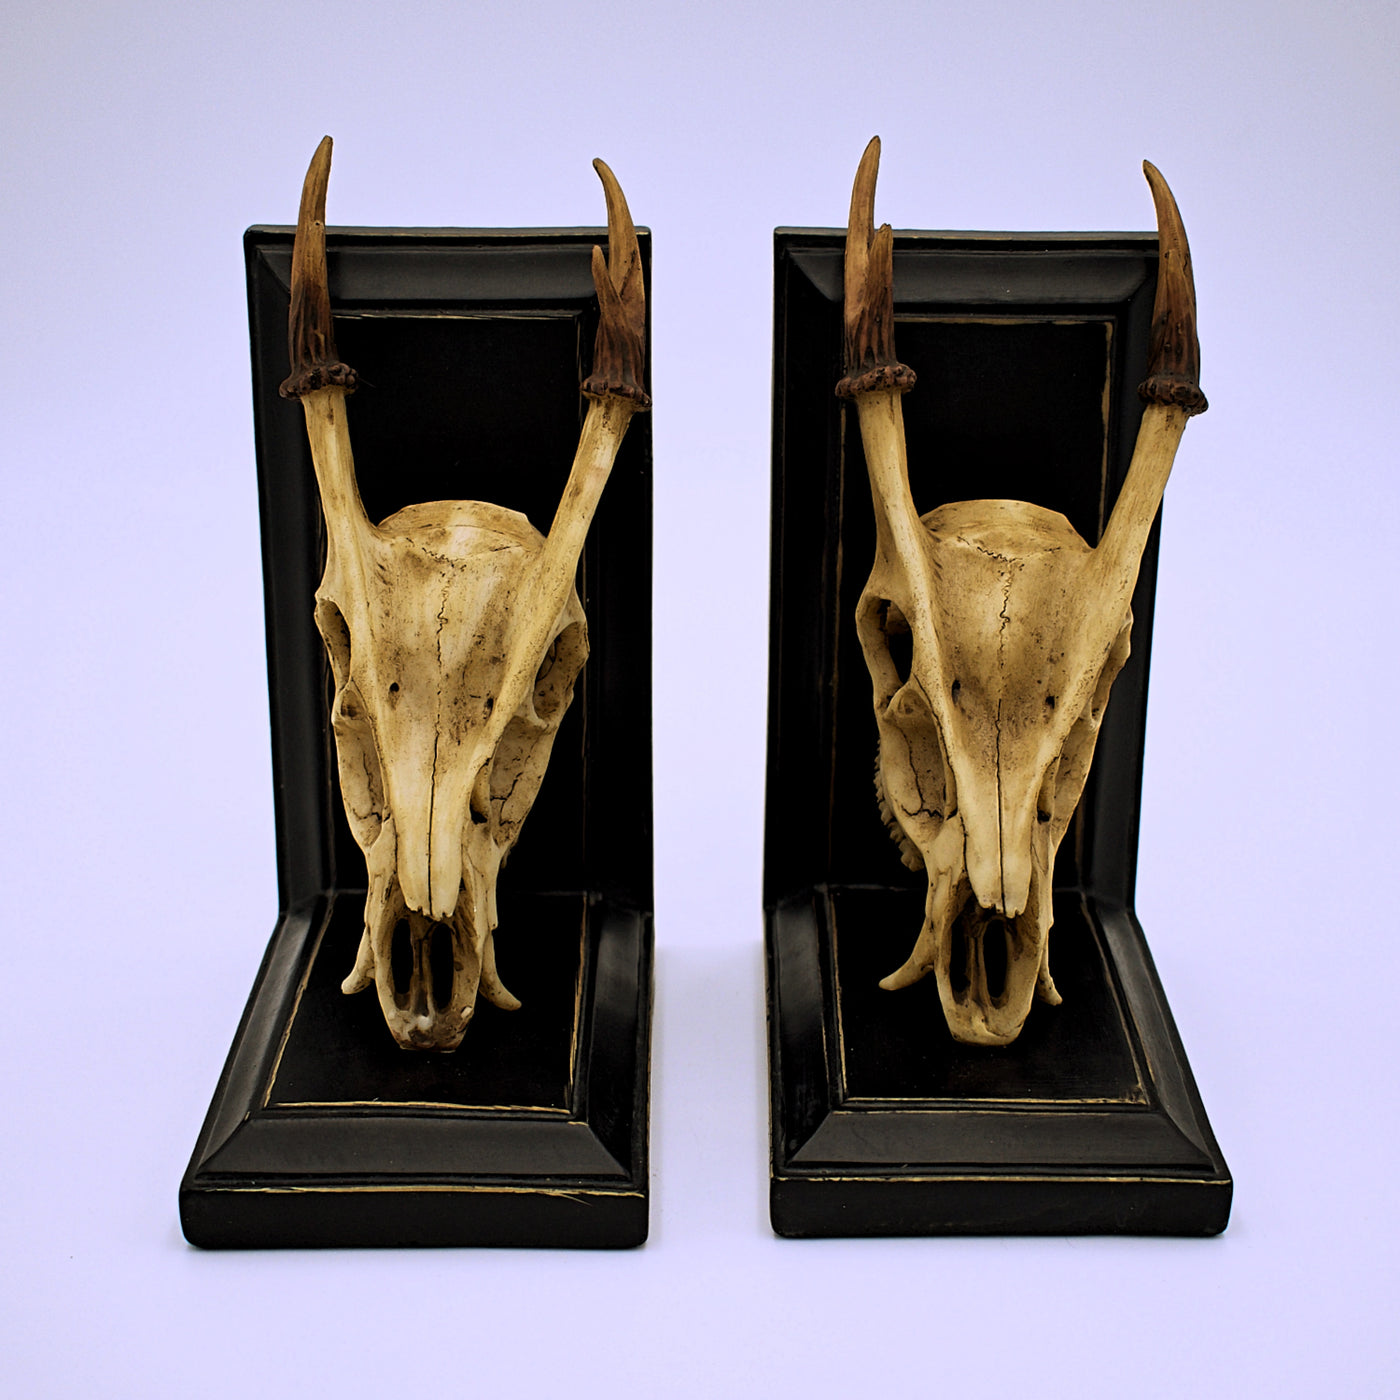 Barking Deer Skull Bookends Set of 2 - The Cranio Collections